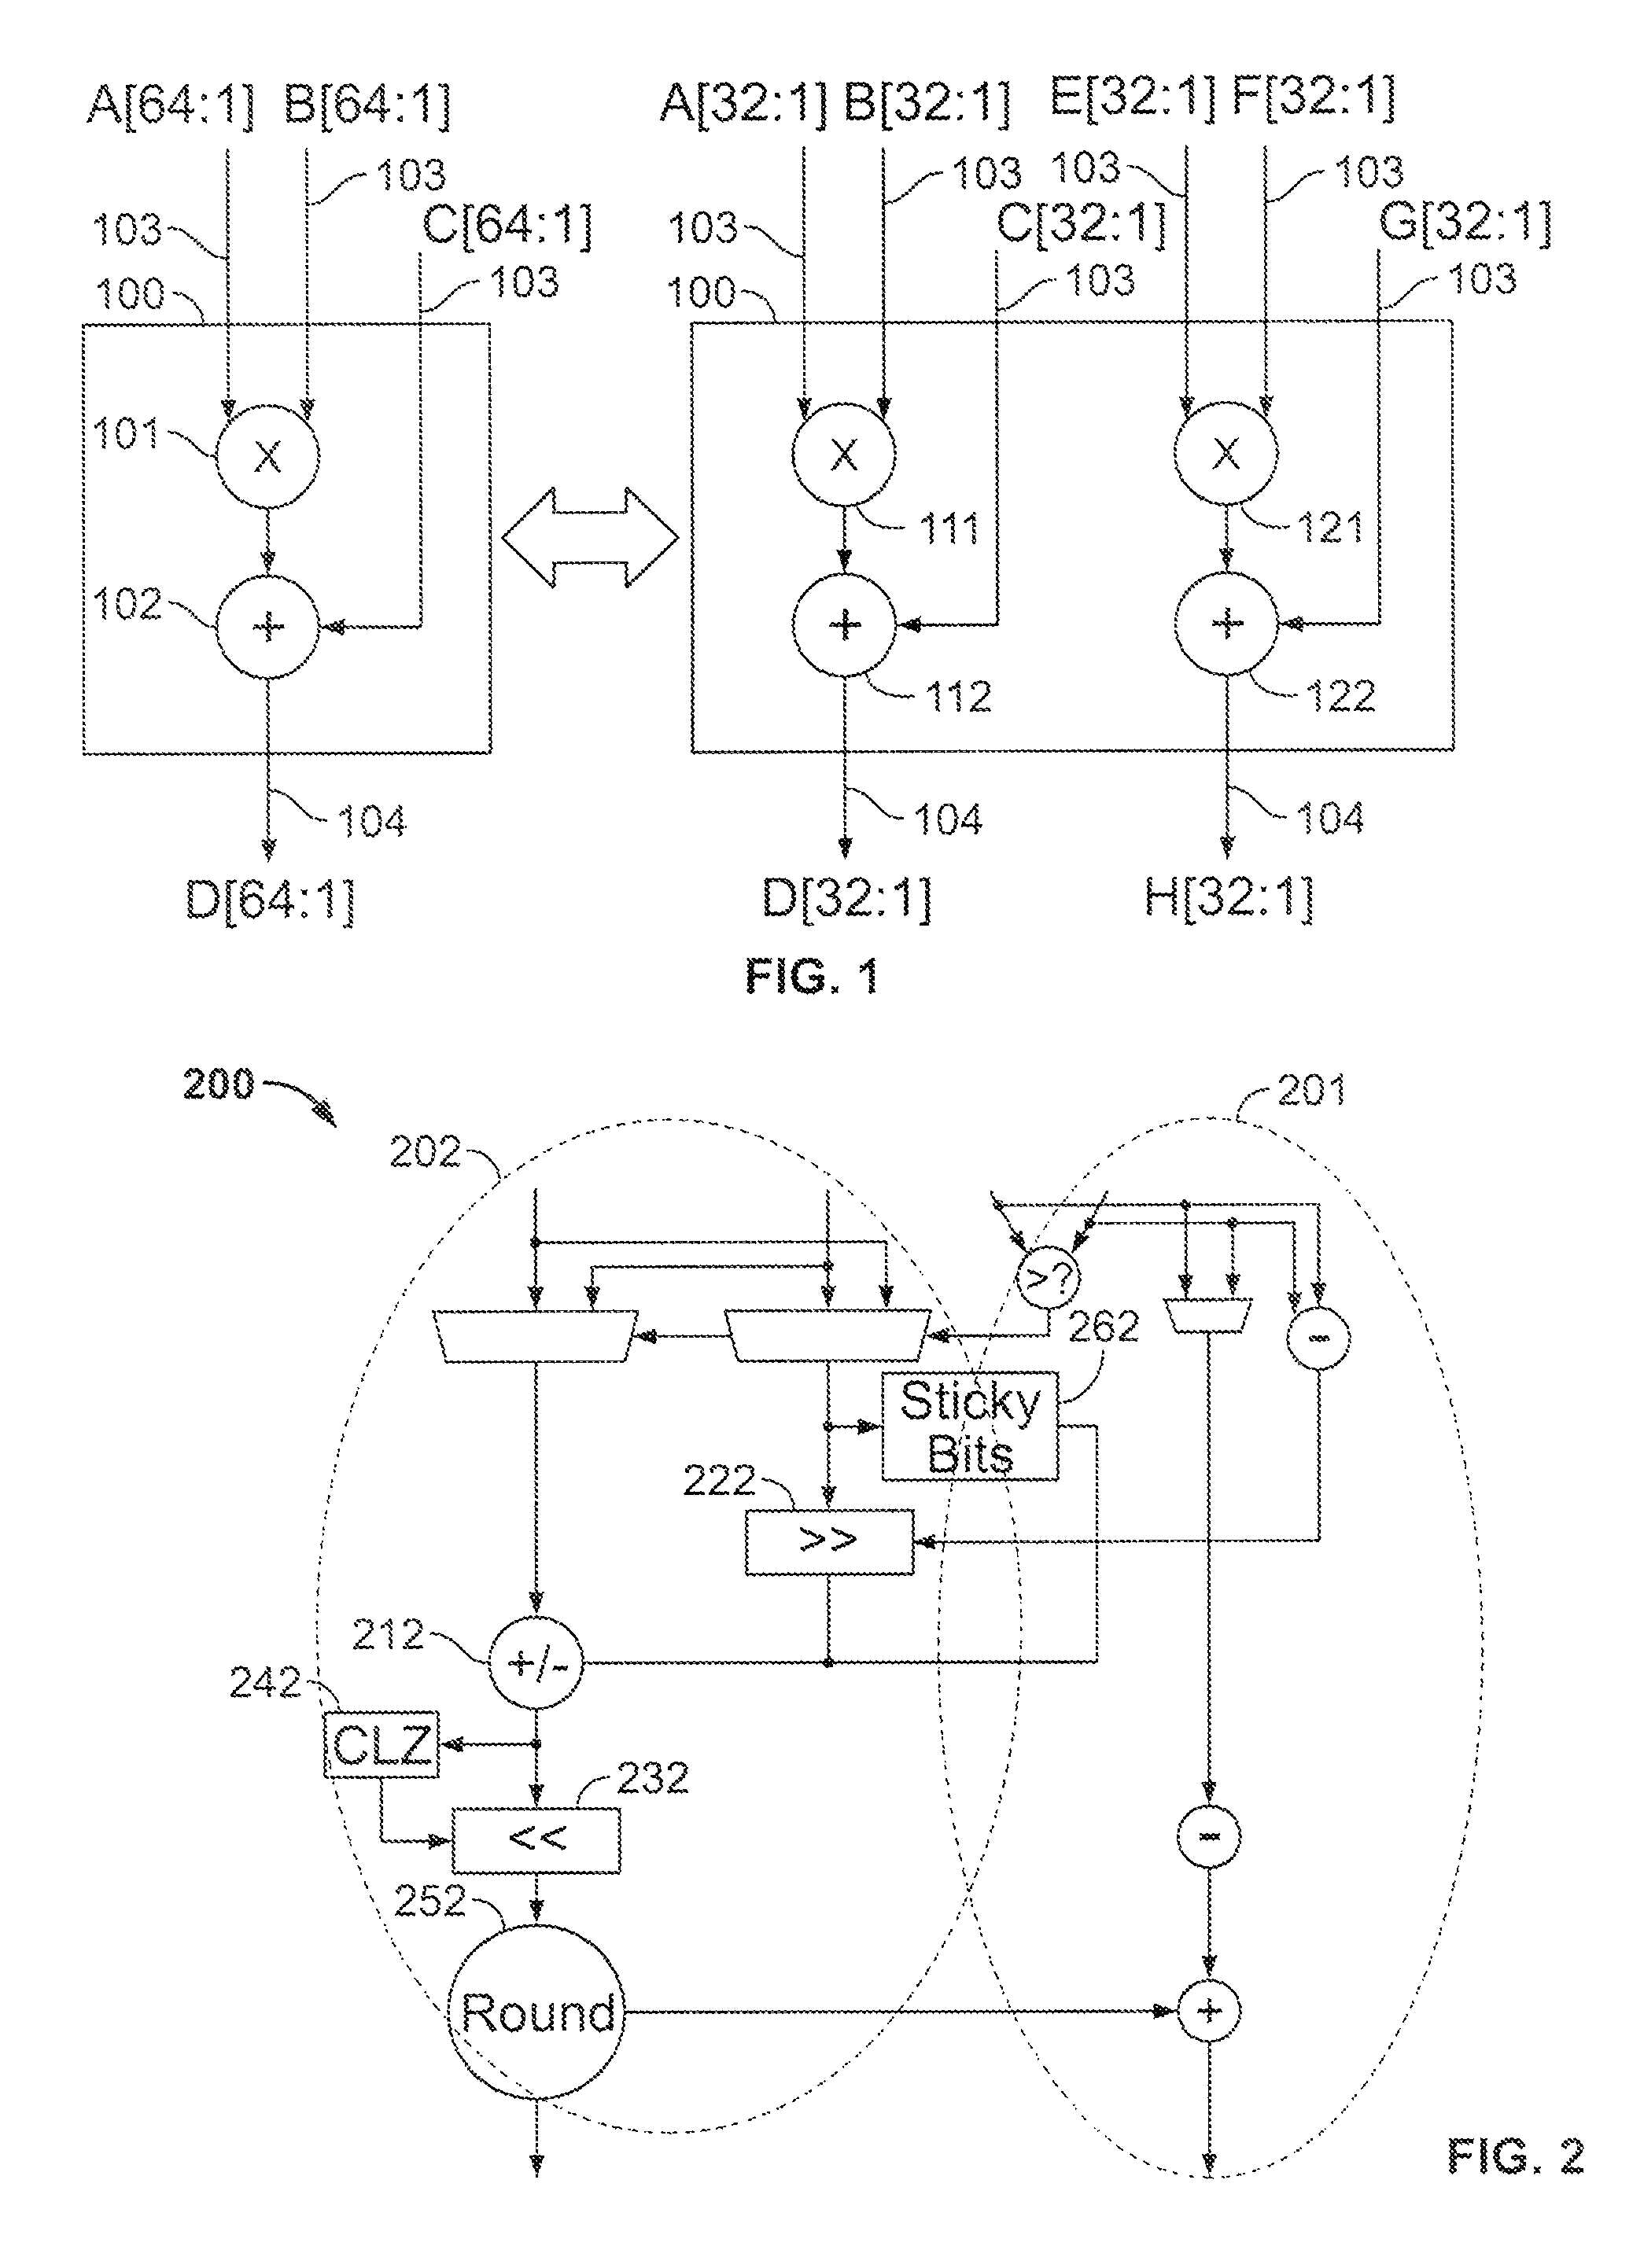 Multiple-precision processing block in a programmable integrated circuit device